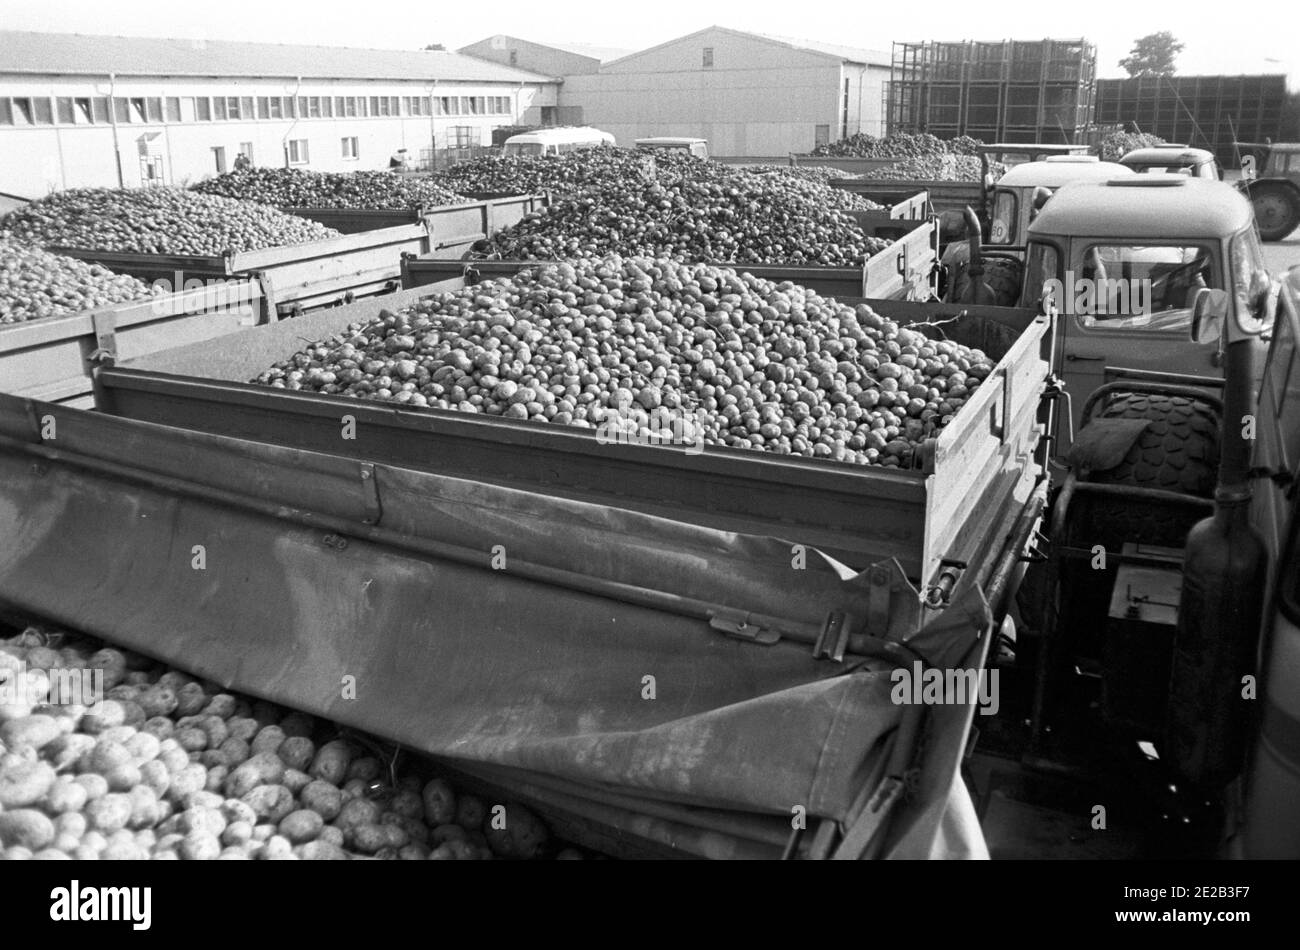 01 October 1985, Saxony, Eilenburg: Potatoes are delivered to the Eilenburg potato warehouse after harvesting in the mid-1980s. Exact date of recording not known. Photo: Volkmar Heinz/dpa-Zentralbild/ZB Stock Photo